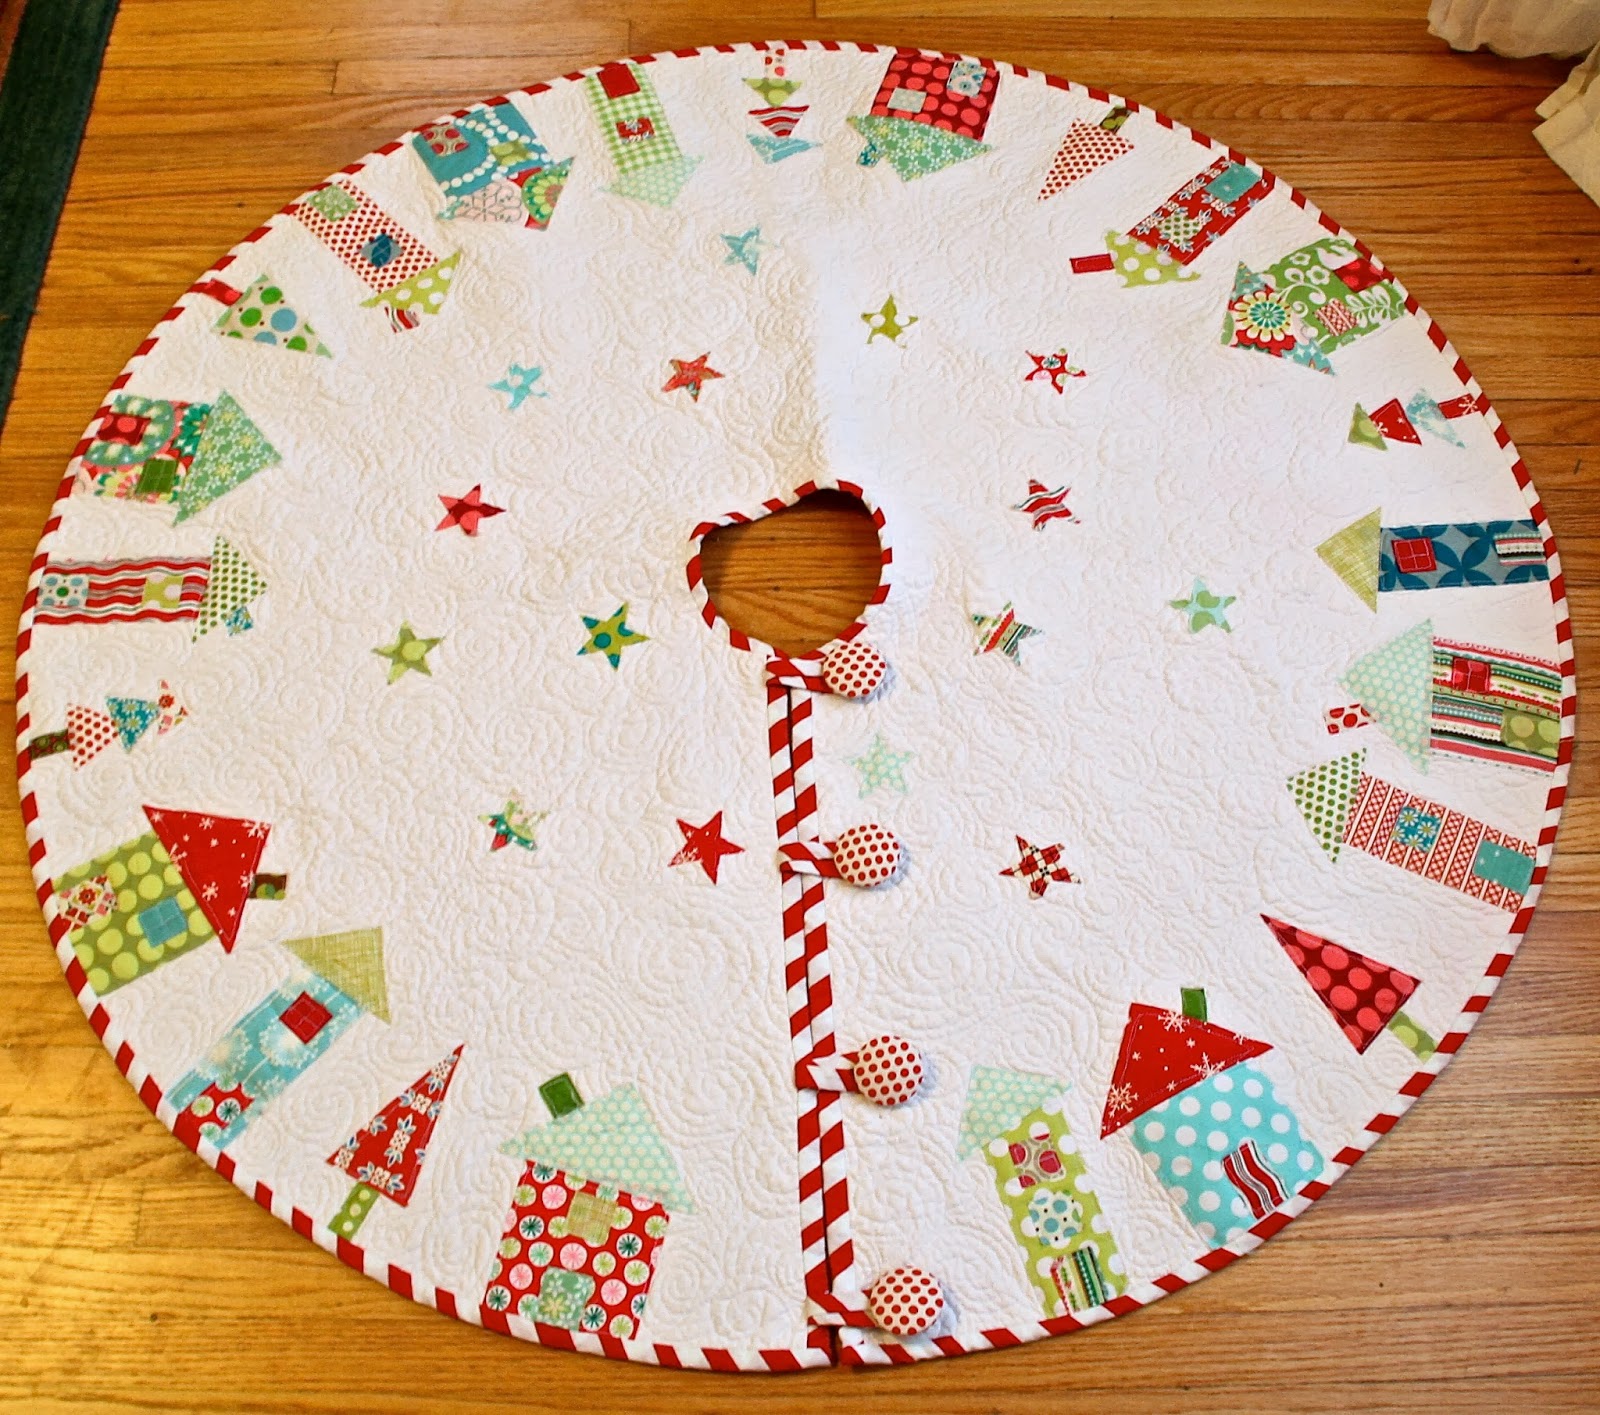 Quilted Christmas Tree Skirt Tutorials I Want to Try : Behind Mytutorlist.com